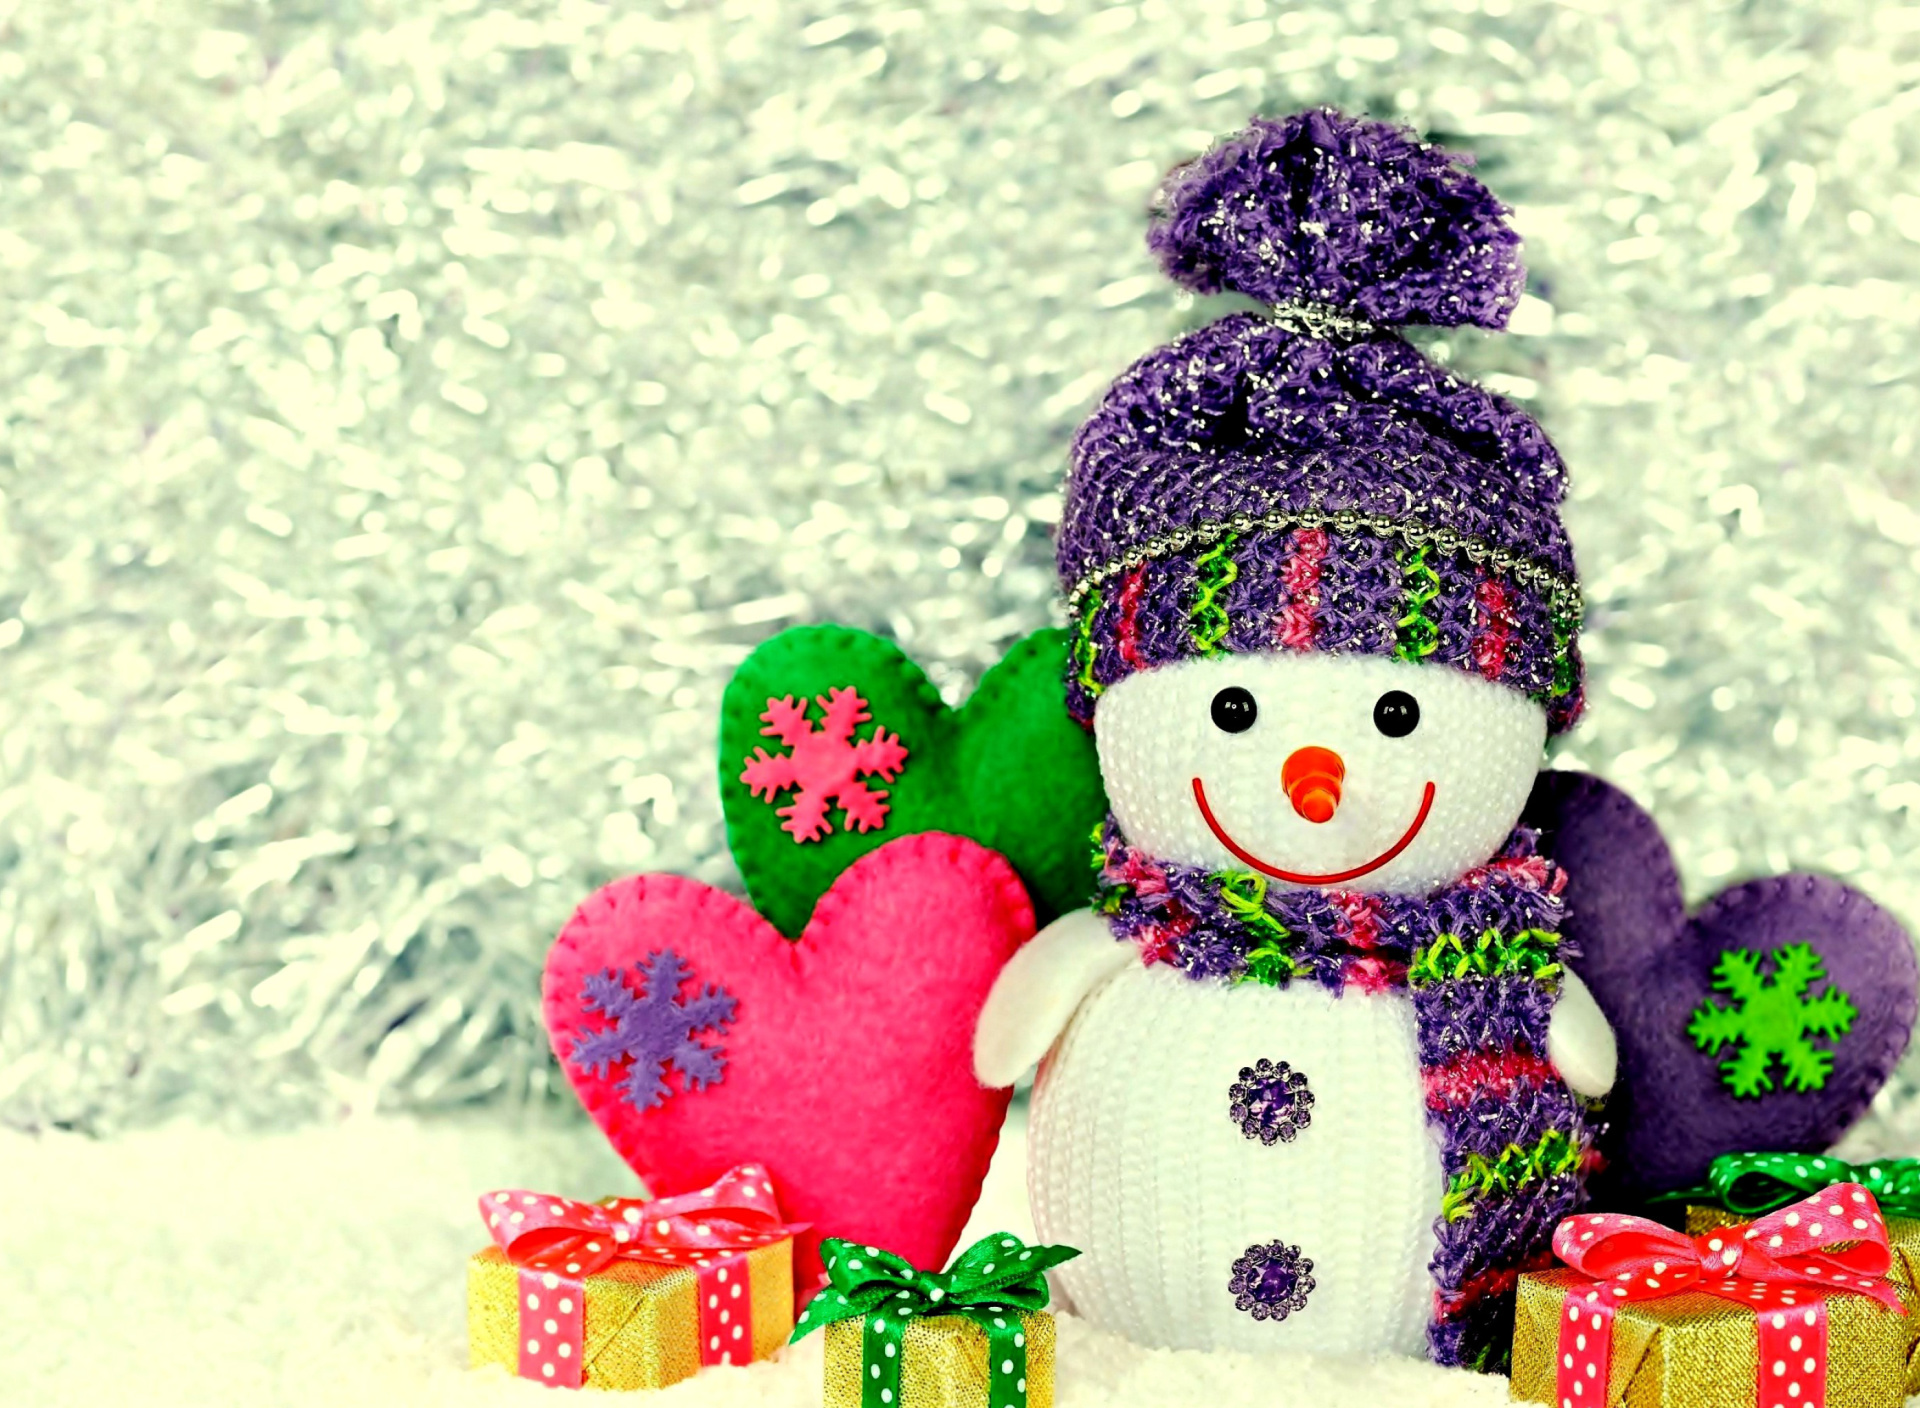 Homemade Snowman with Gifts wallpaper 1920x1408